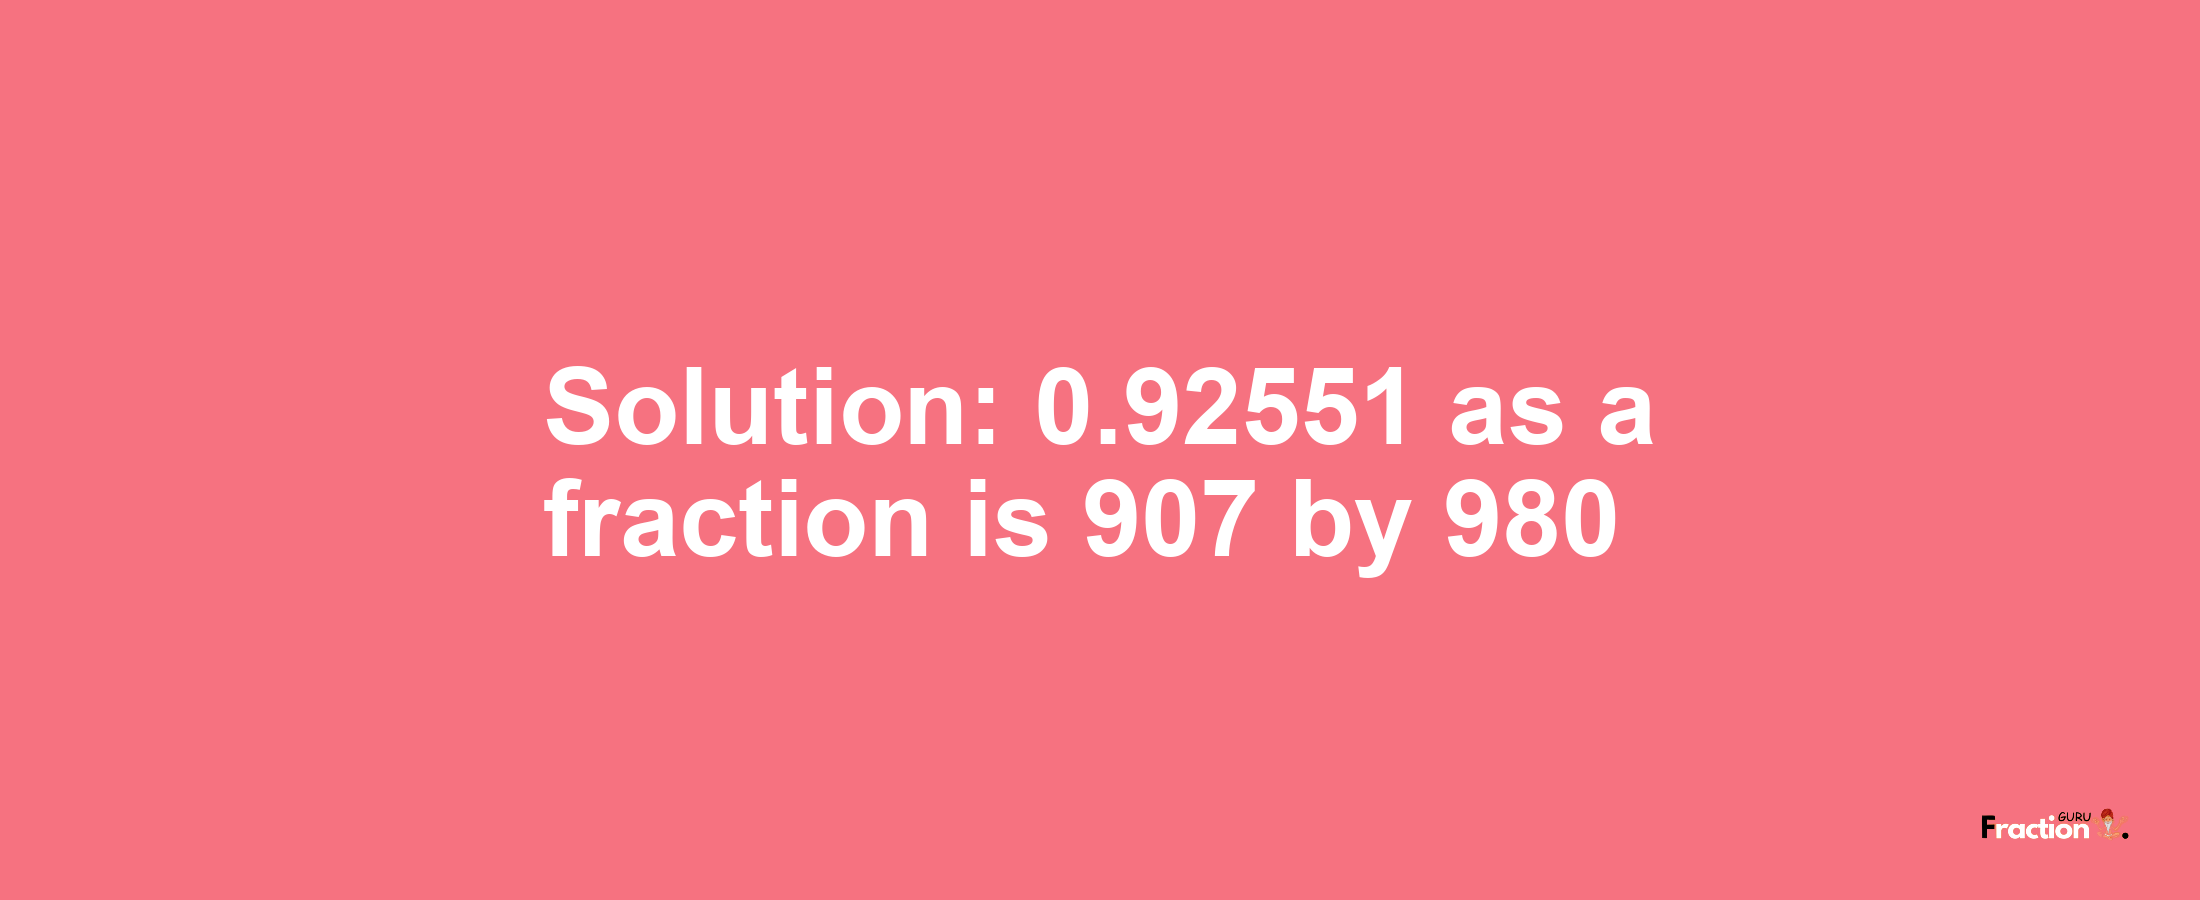 Solution:0.92551 as a fraction is 907/980